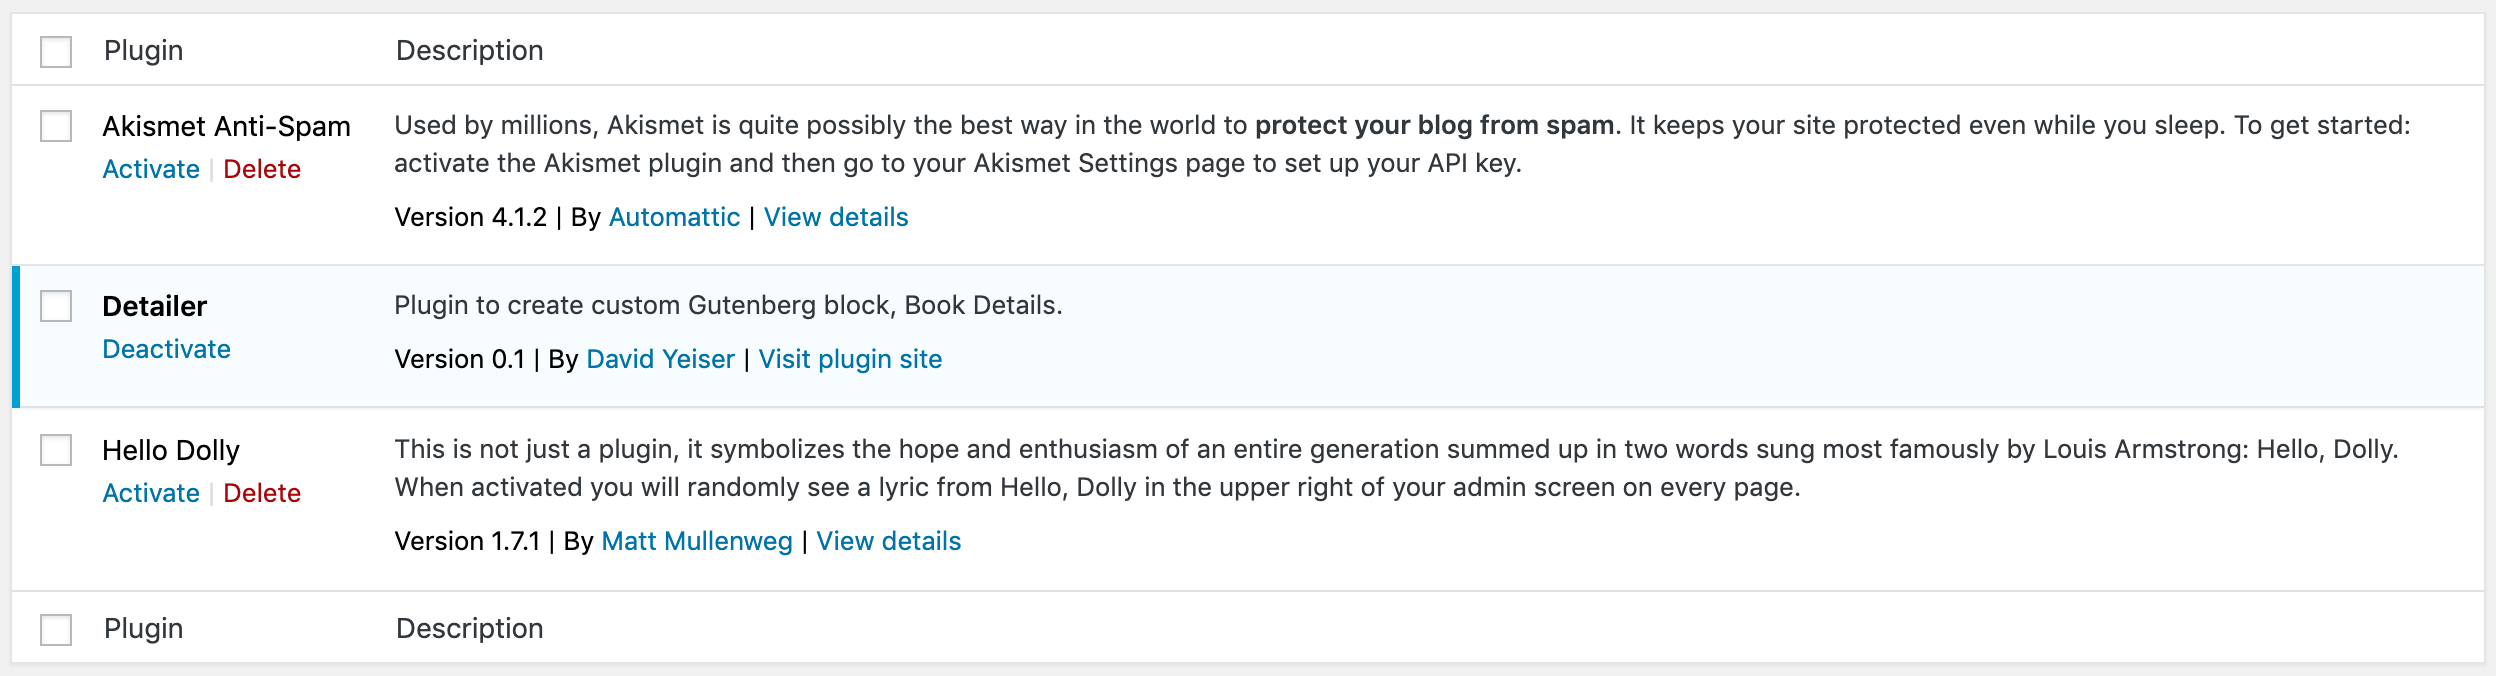 Screenshot of the WordPress plugins page showing the Detailer plugin activated.